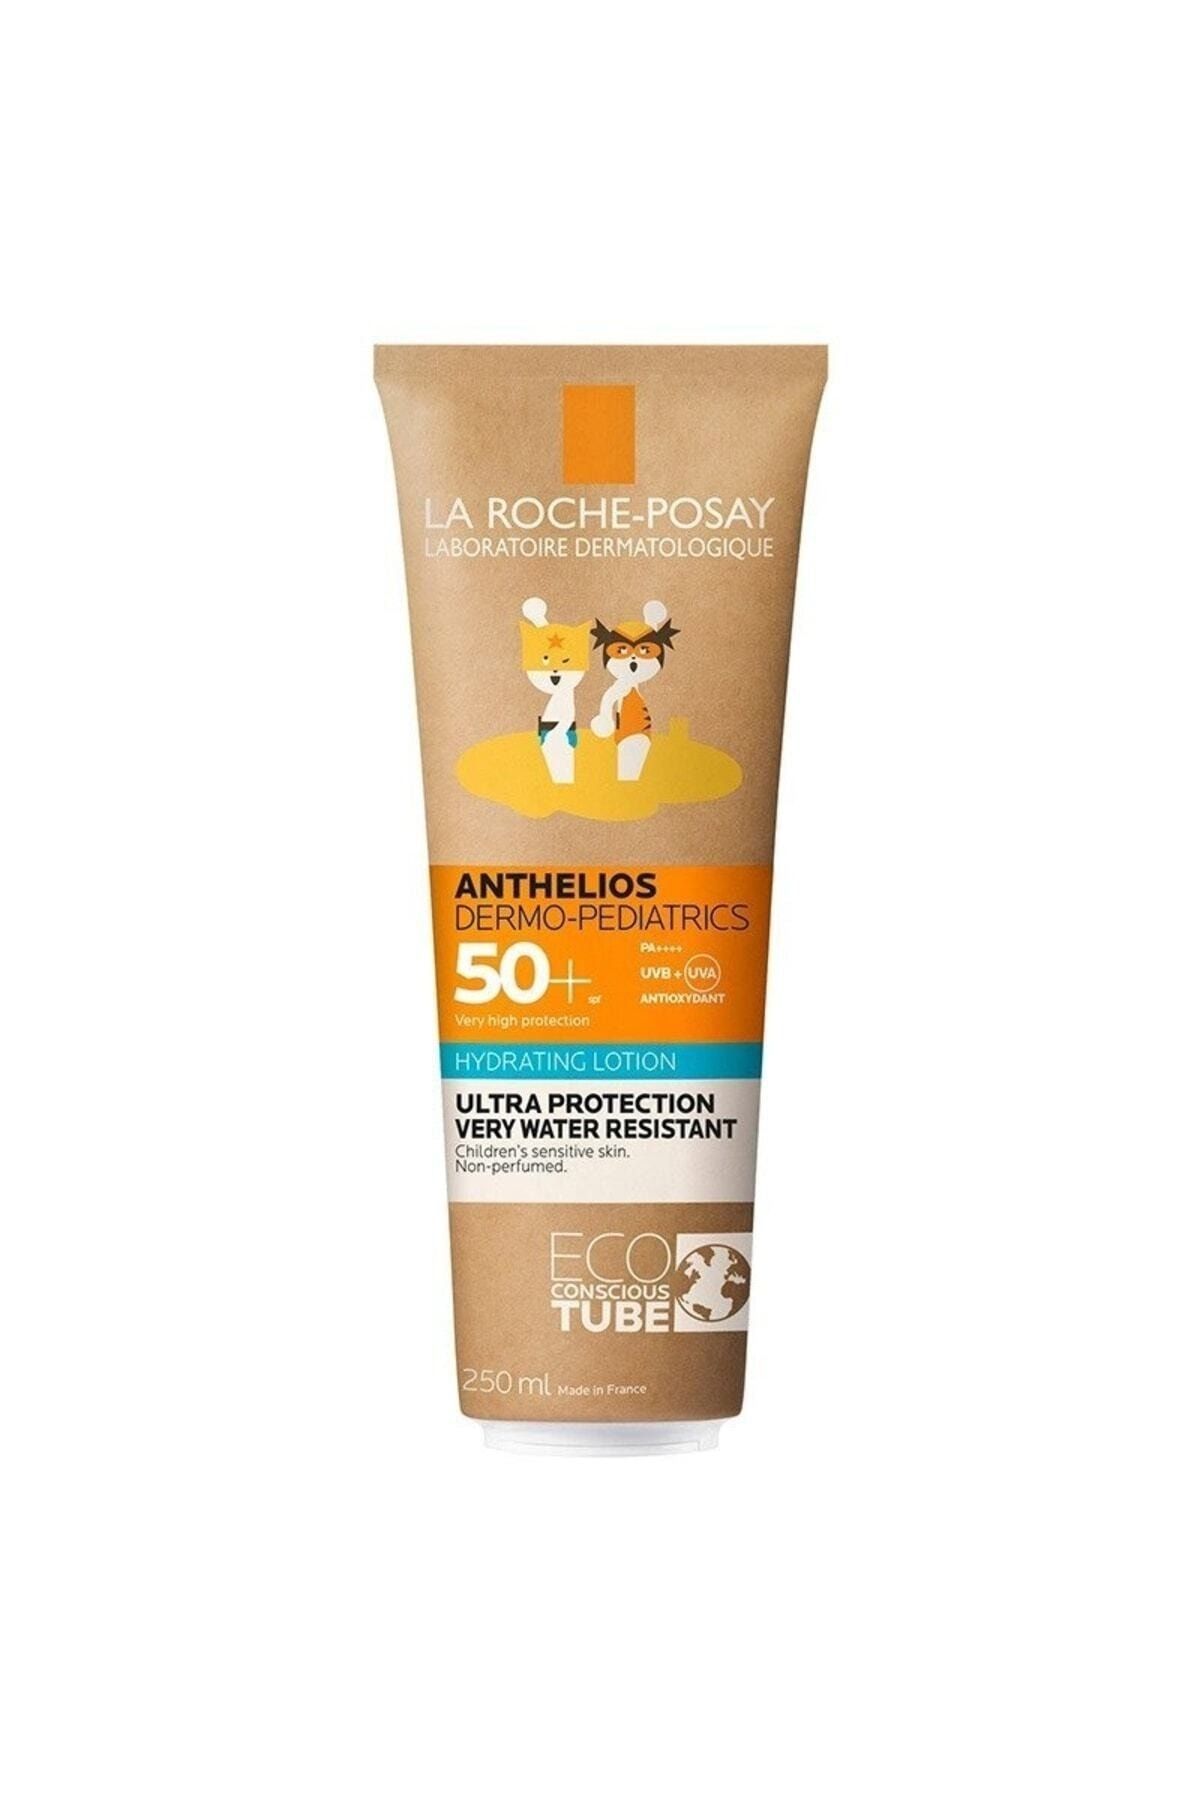 La Roche Posay Anthelios Spf 50+ Sun Lotion For Face And Body For Kids 250 Ml